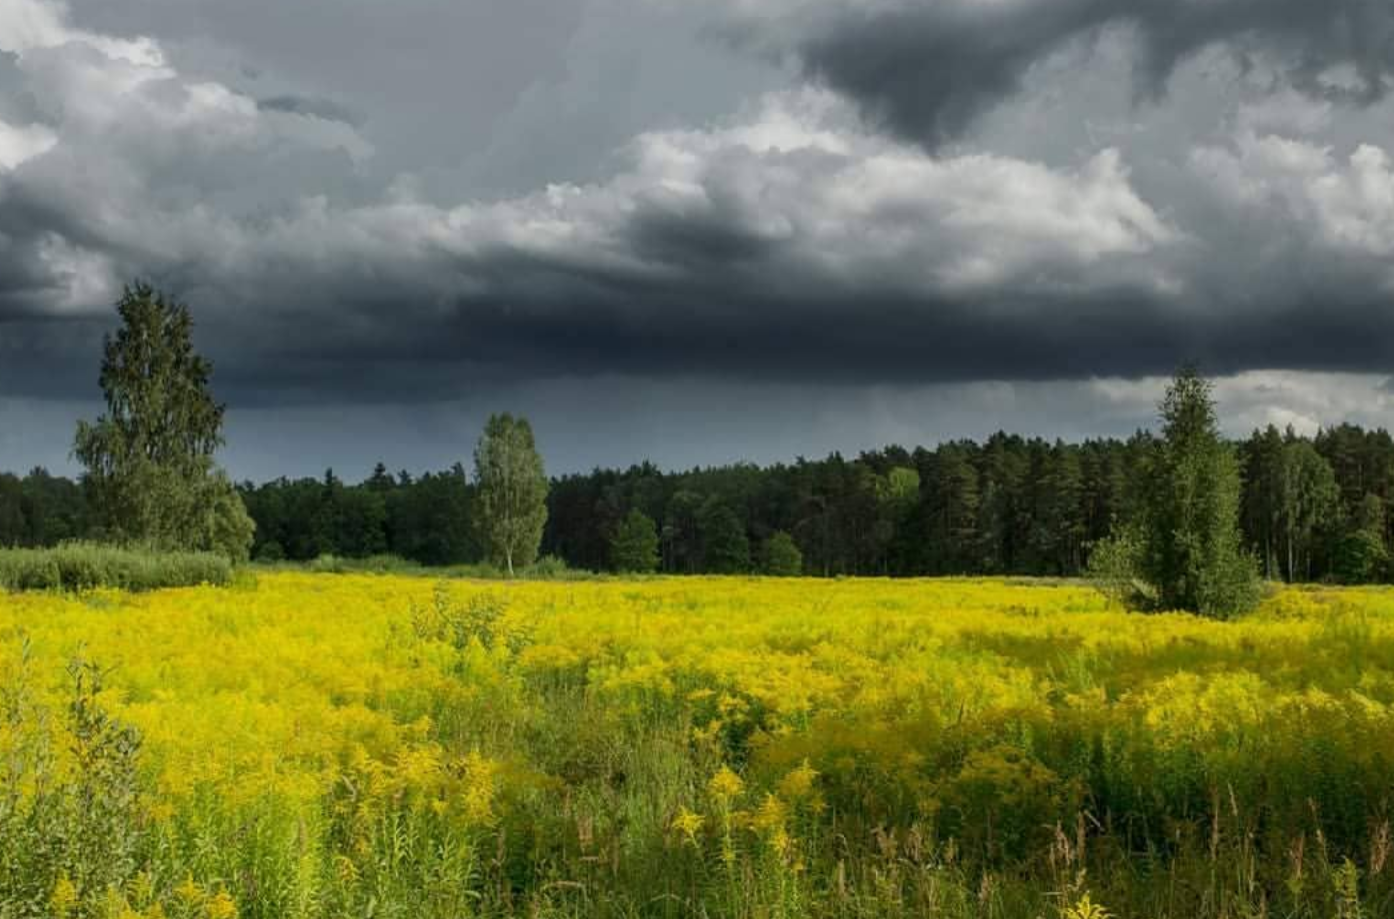 storm over a yellow field